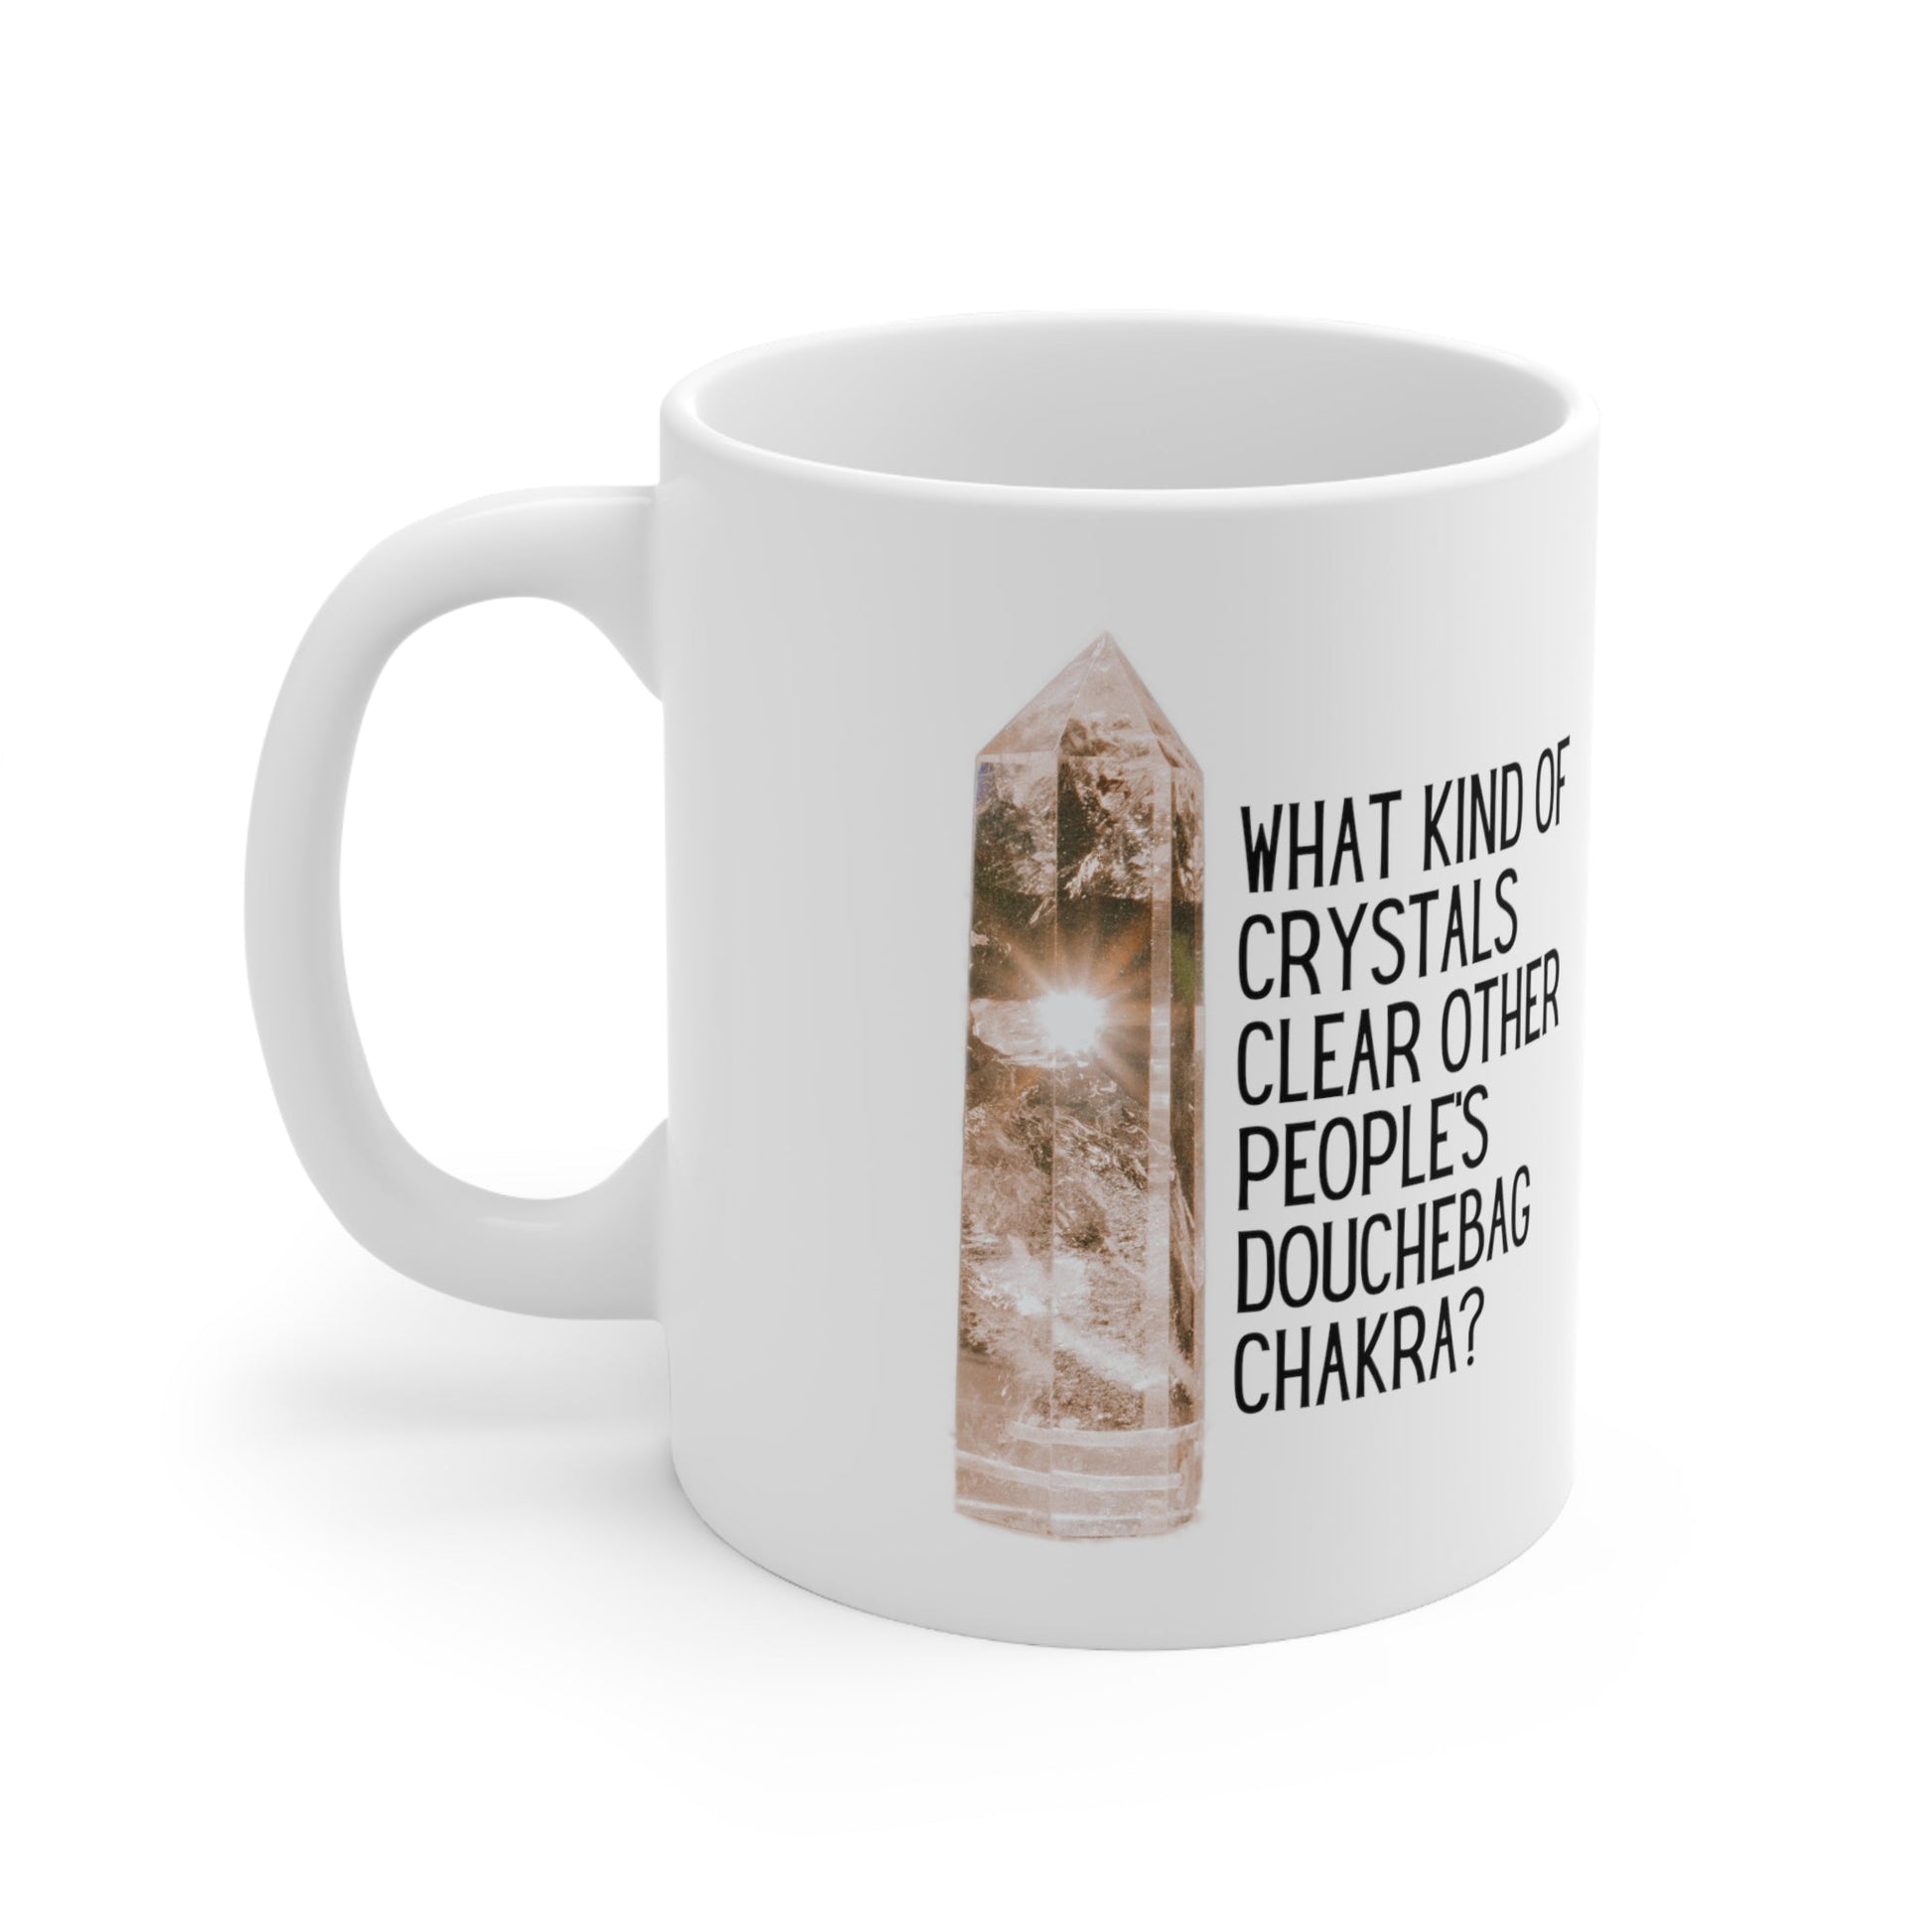 What Kind of Crystals Clear Other People's Douchebag Chakra Ceramic Mug 11oz